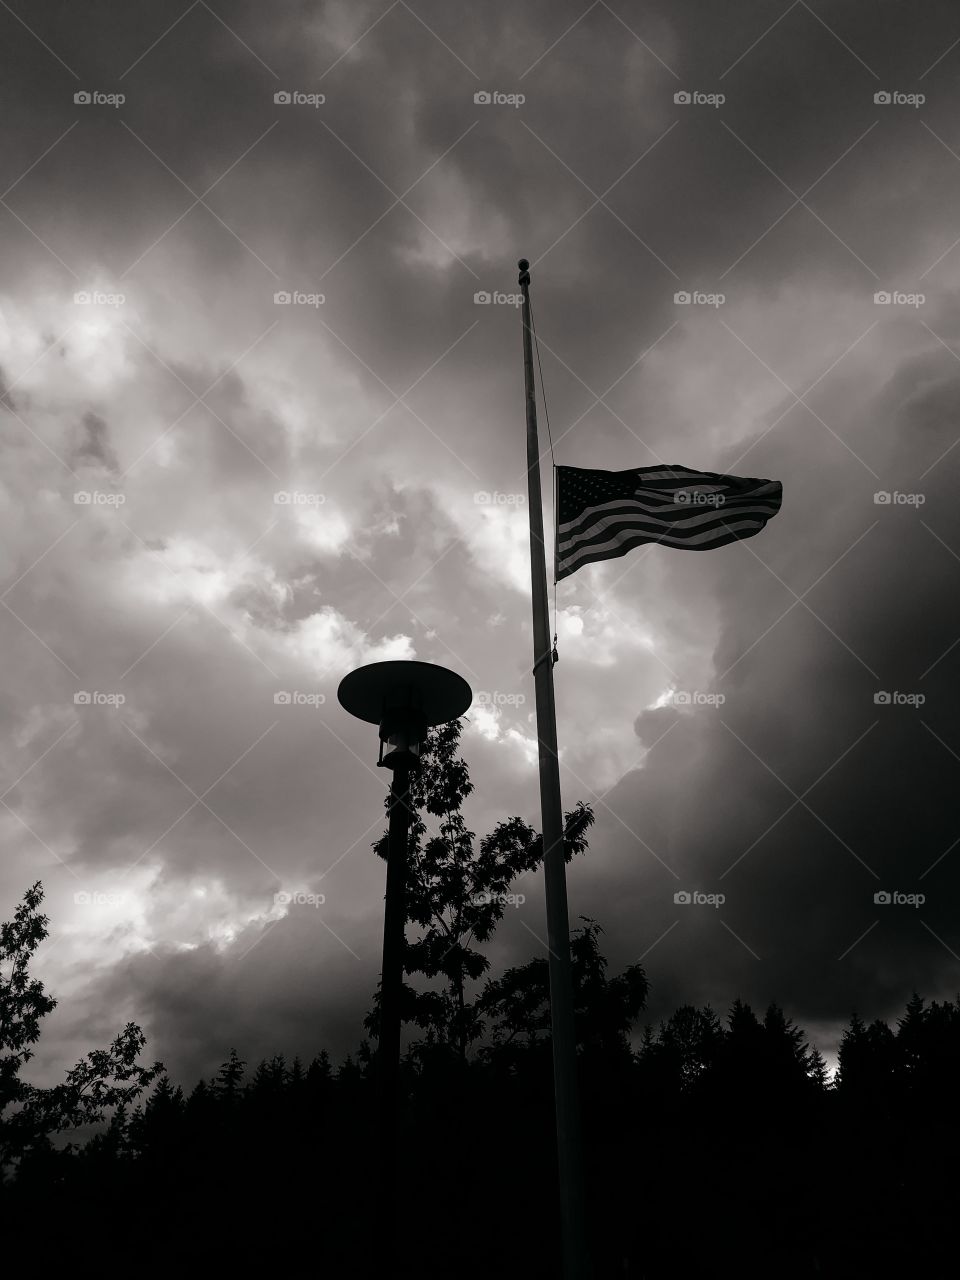 Flag with storm clouds behind